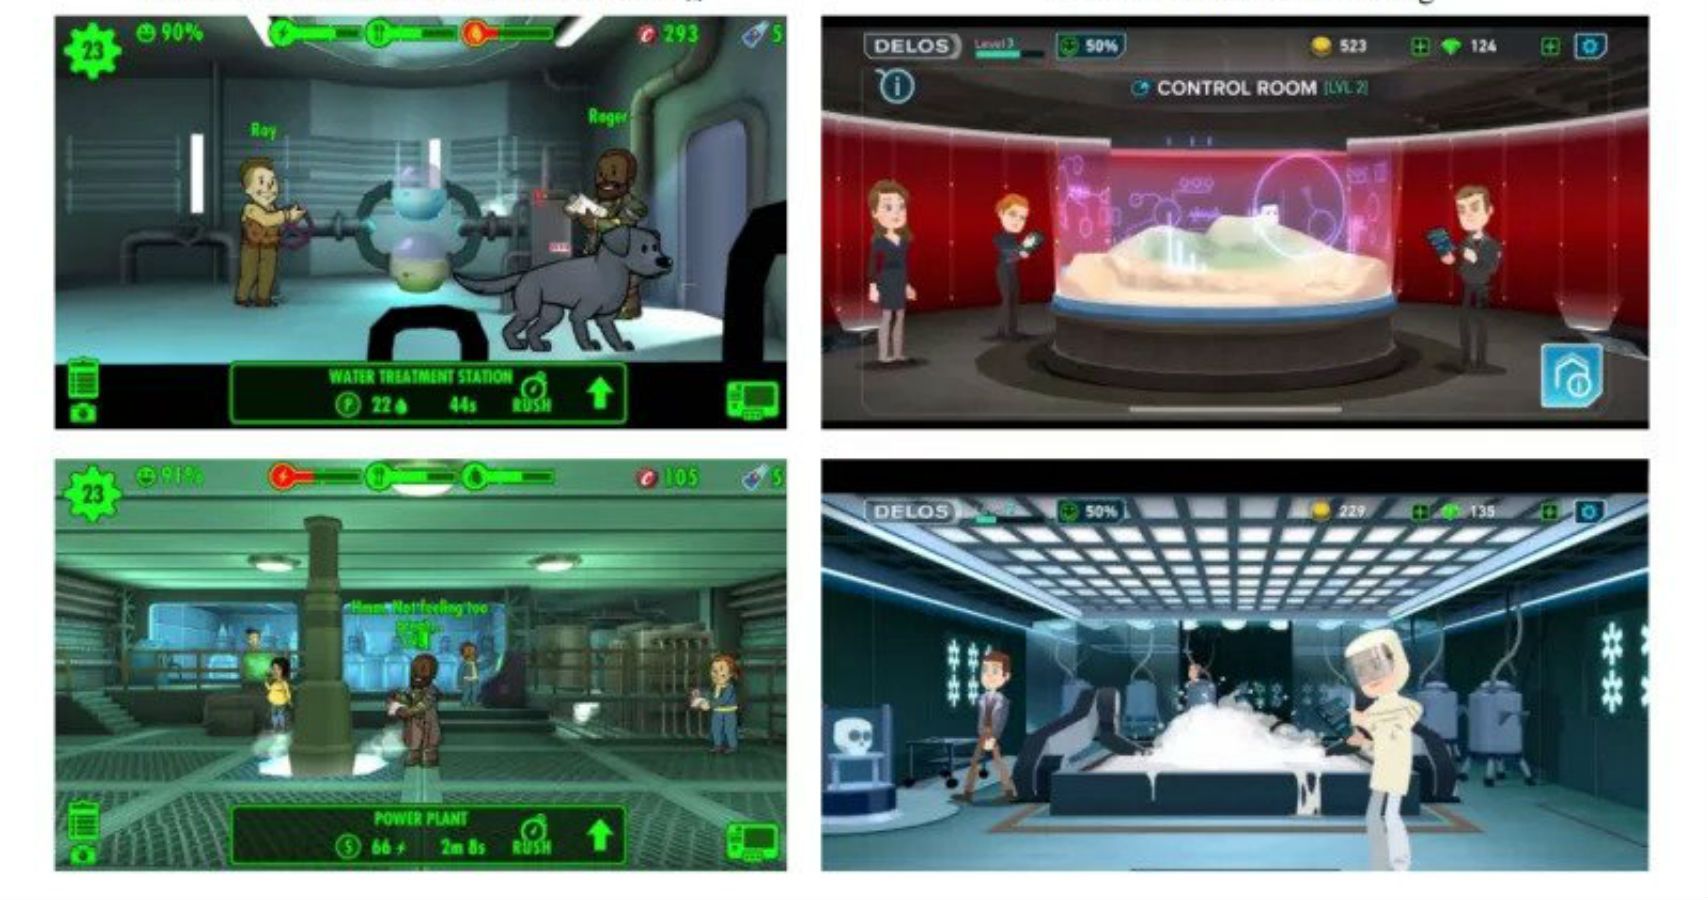 Bethesda Knows Westworld App Was Ripped Off Fallout Shelter  It Has The Same Bugs